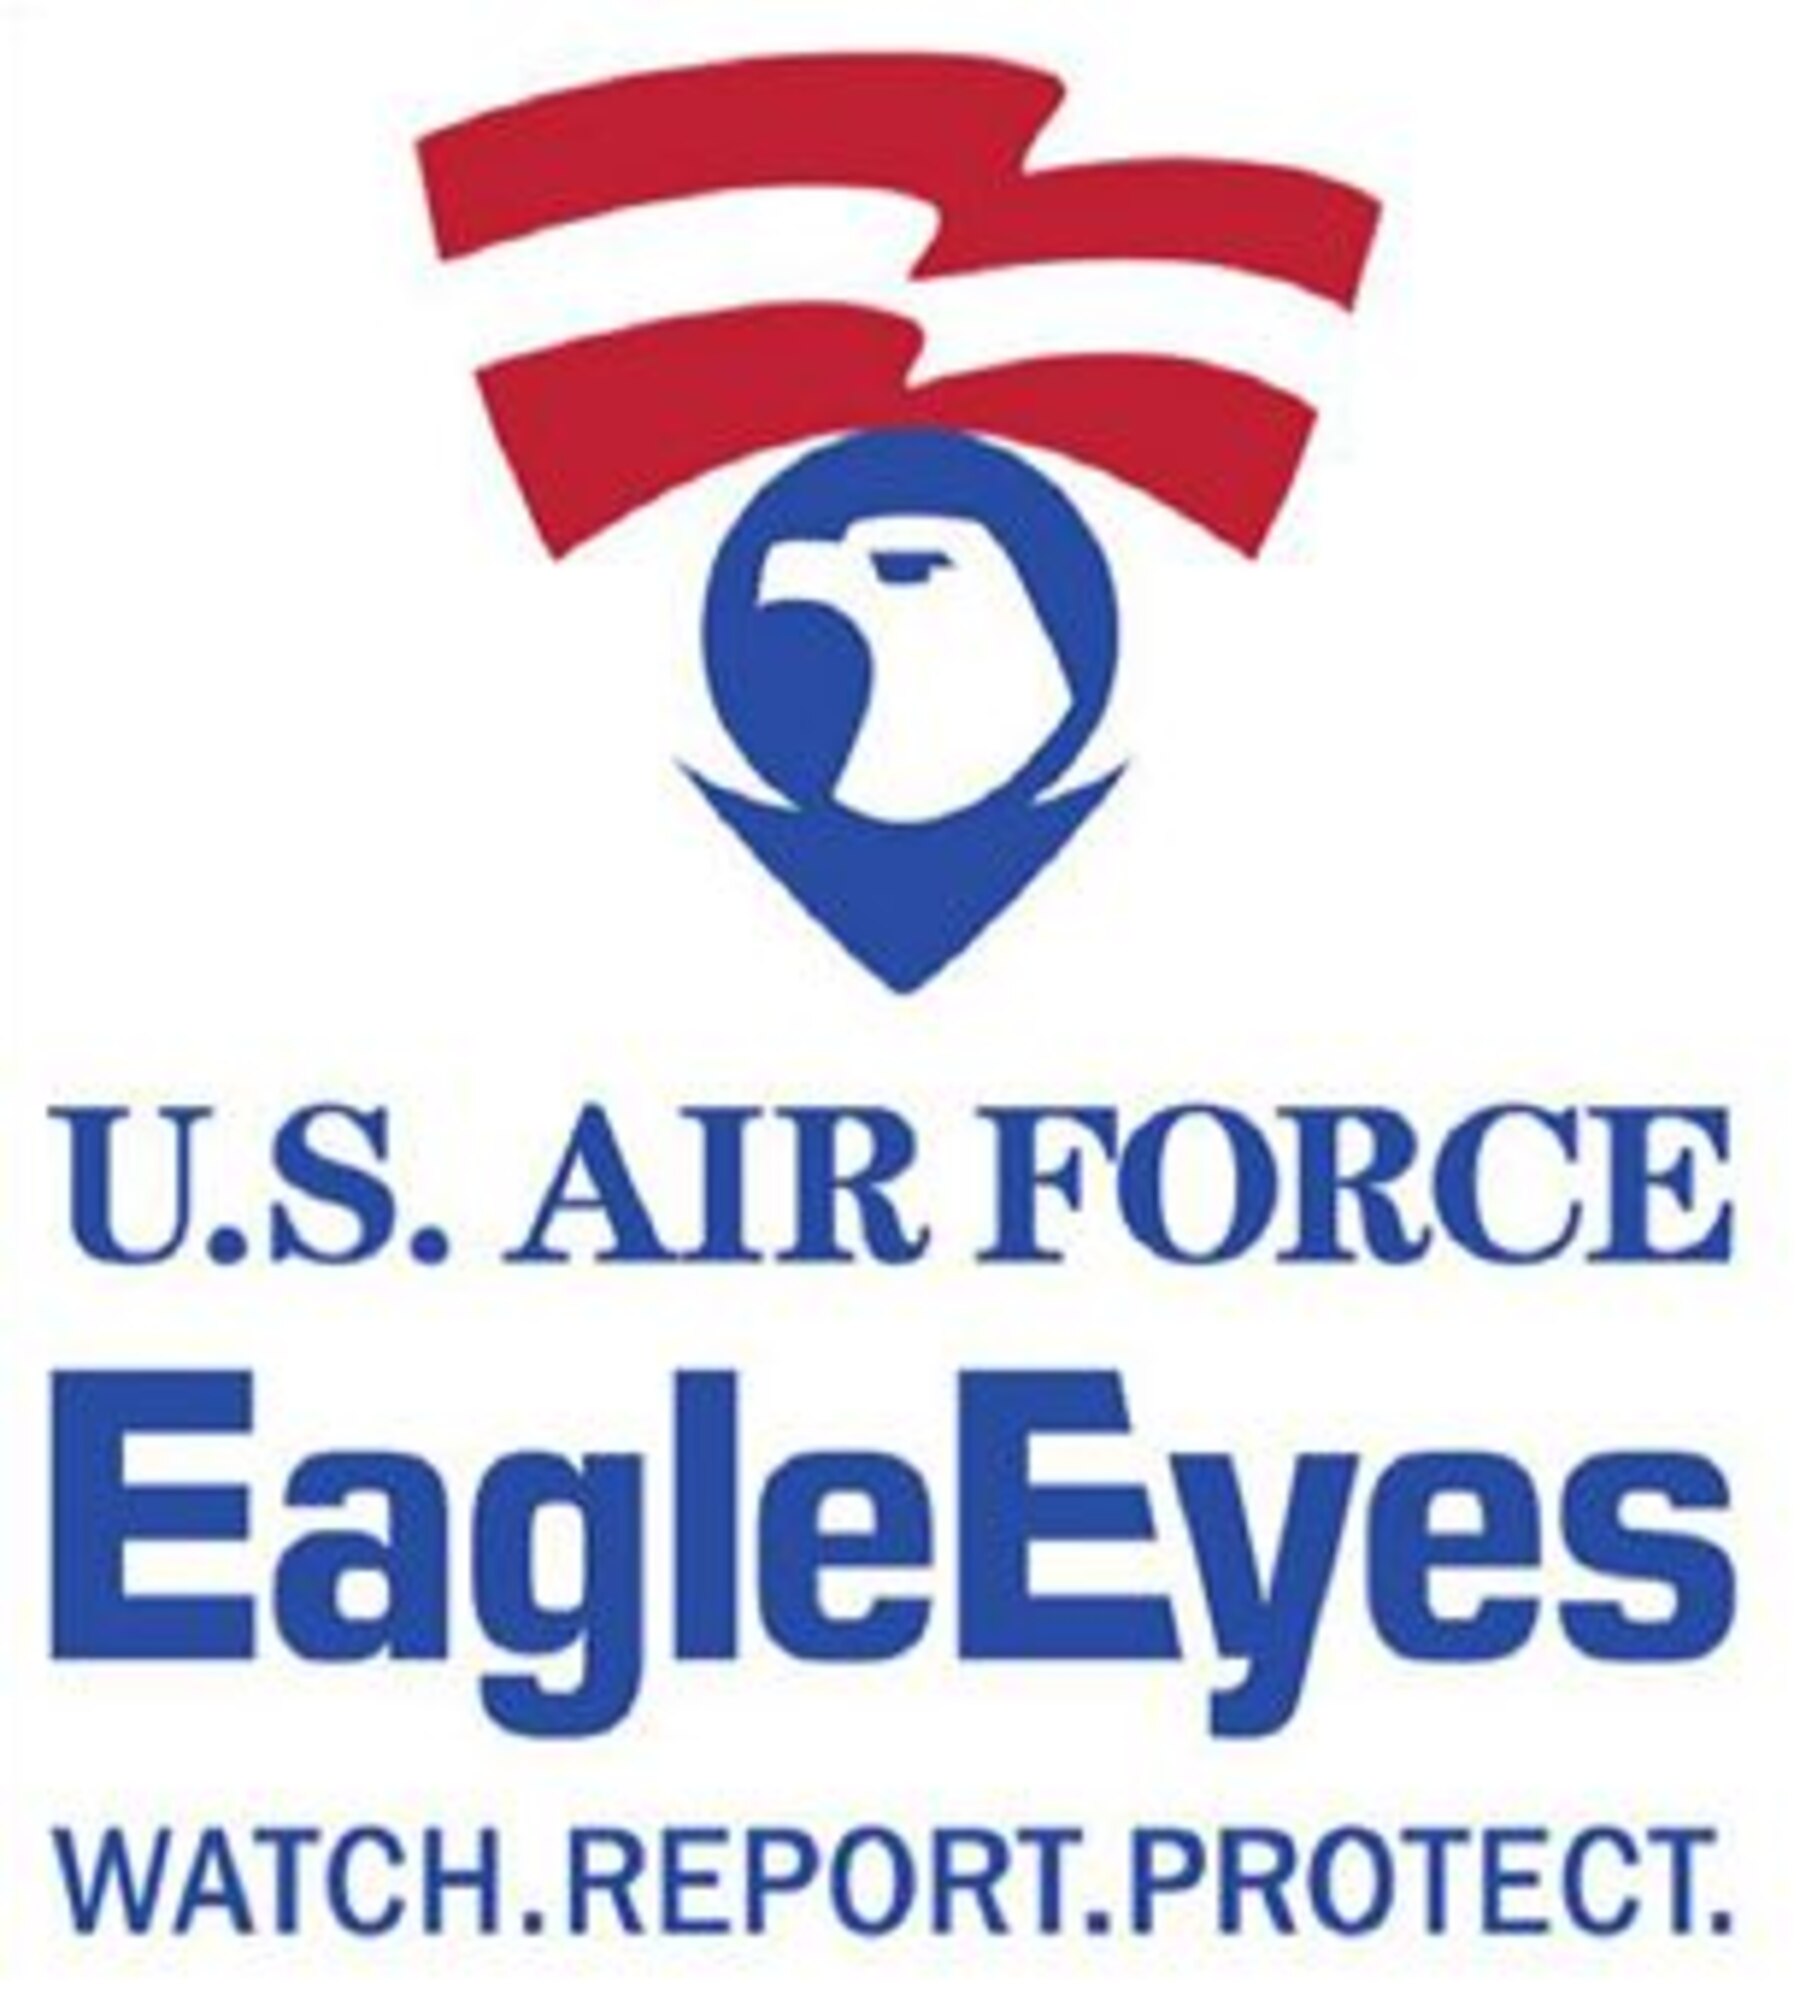 The Eagle Eyes program is an Air Force anti-terrorism initiative that enlists the eyes and ears of Air Force members and citizens in the war on terror. Eagle eyes teaches people about the typical activities terrorists engage in to plan their attacks. Armed with this information, anyone can recognize elements of potential terror planning when they see it. The program provides a network of local, 24-hour phone numbers to call whenever a suspicious activity is observed. You and your family are encouraged to learn the categories of suspicious behavior and stay attuned to your surroundings. If you observe something suspicious alert local authorities.